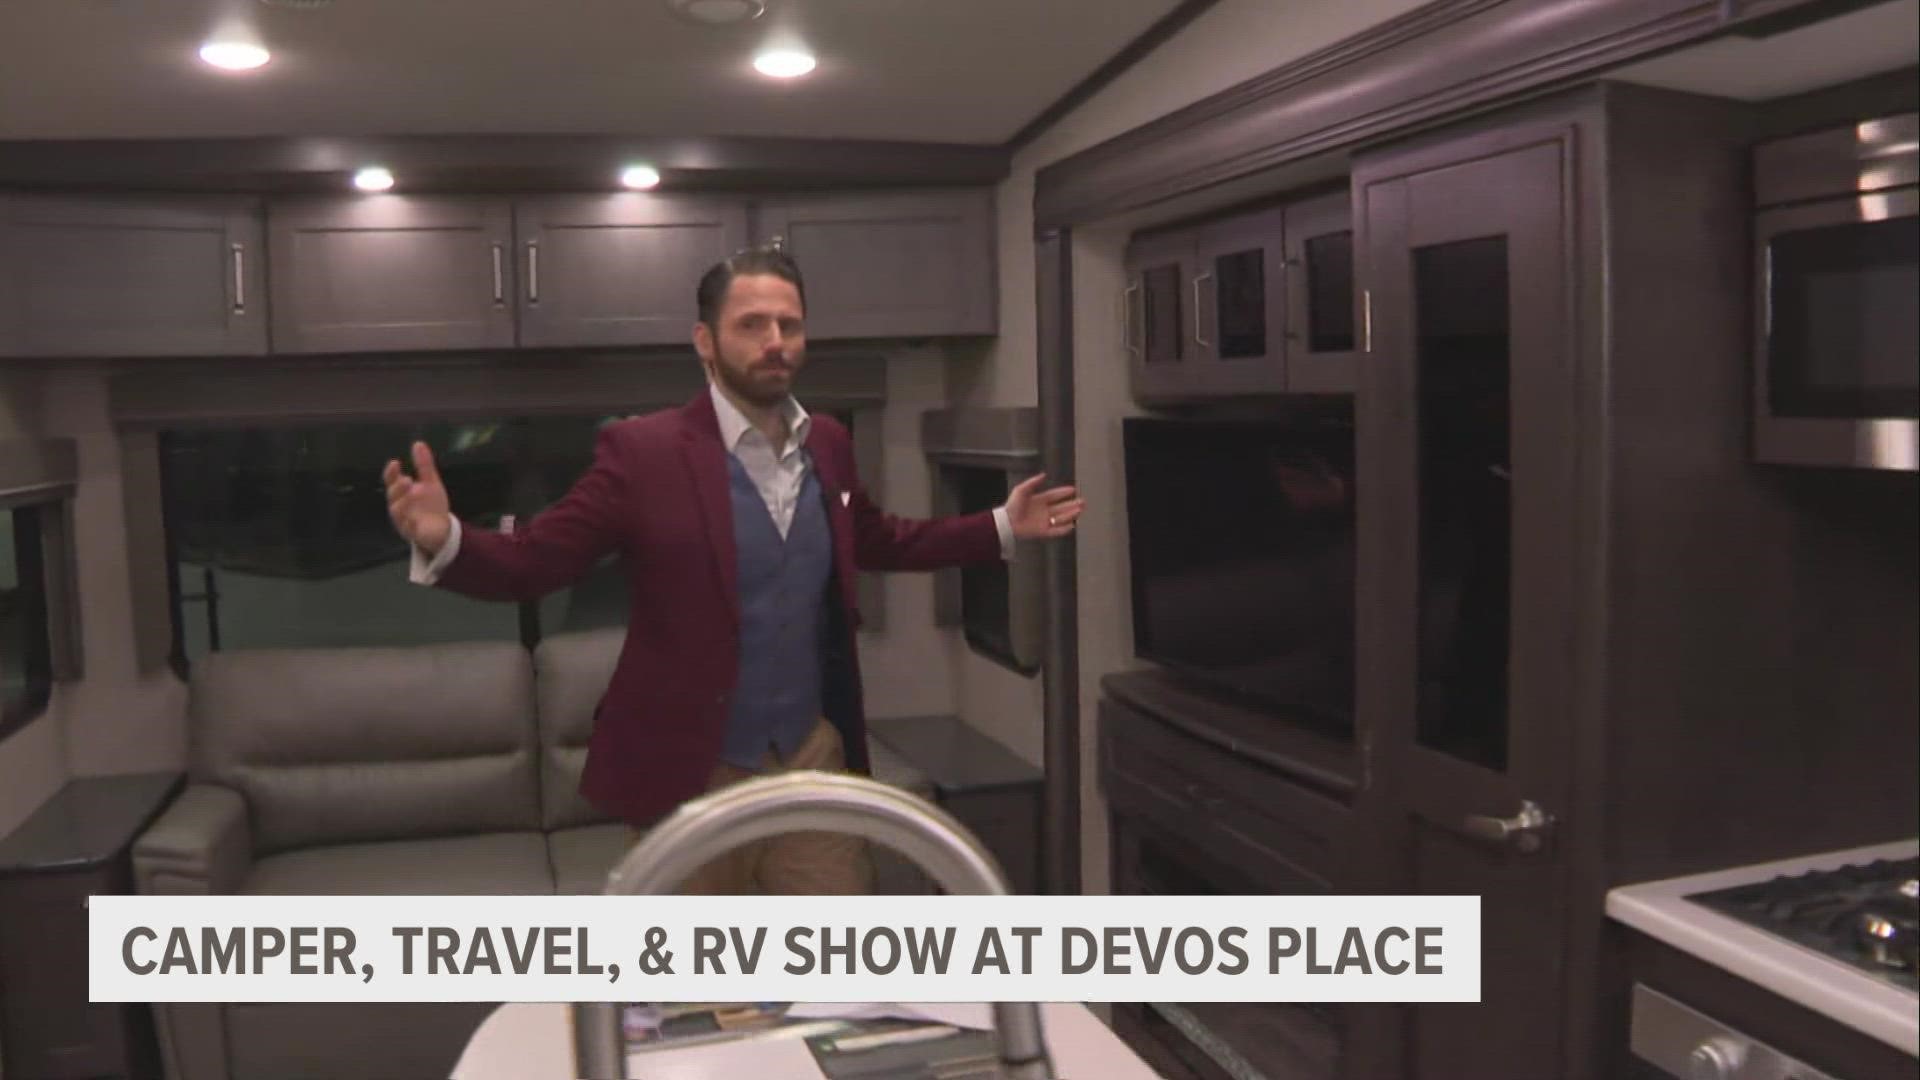 The Camper, Travel & RV Show is at DeVos Place from Thursday until Sunday.